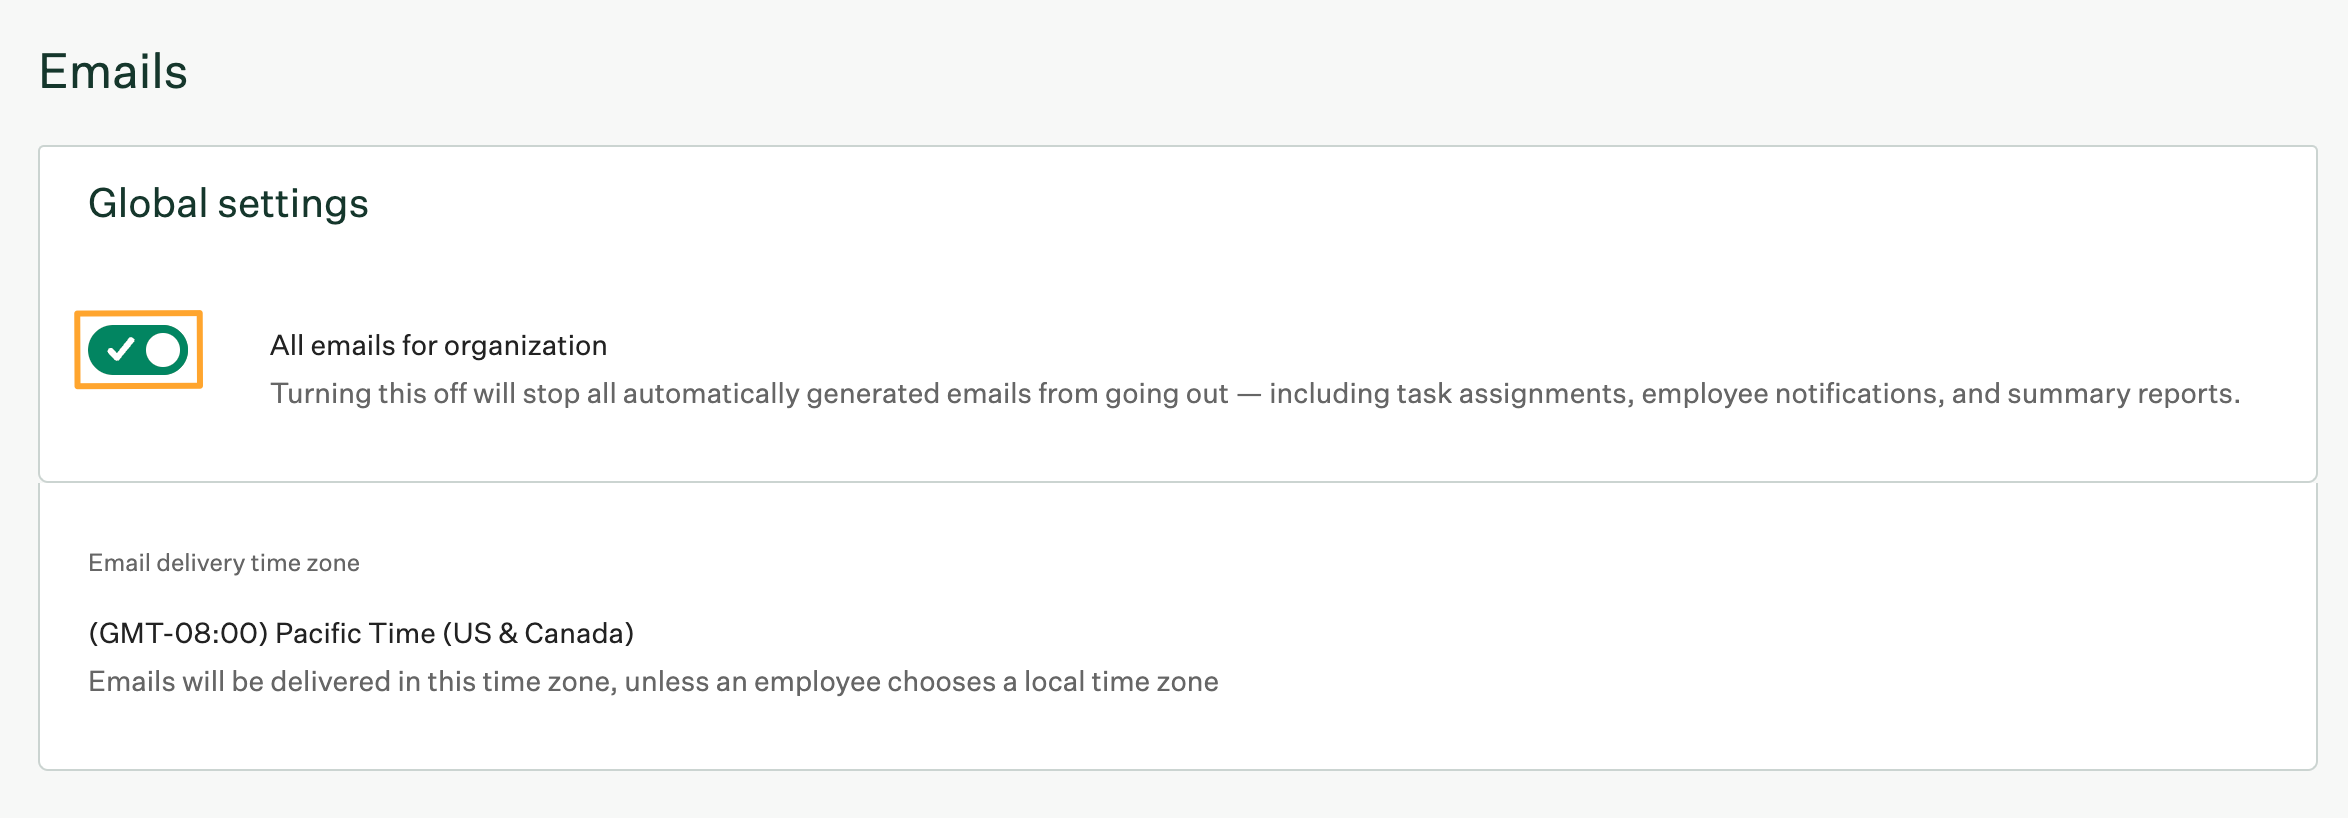 Emails page in Greenhouse Onboarding Settings with All emails for organization enabled and highlighted